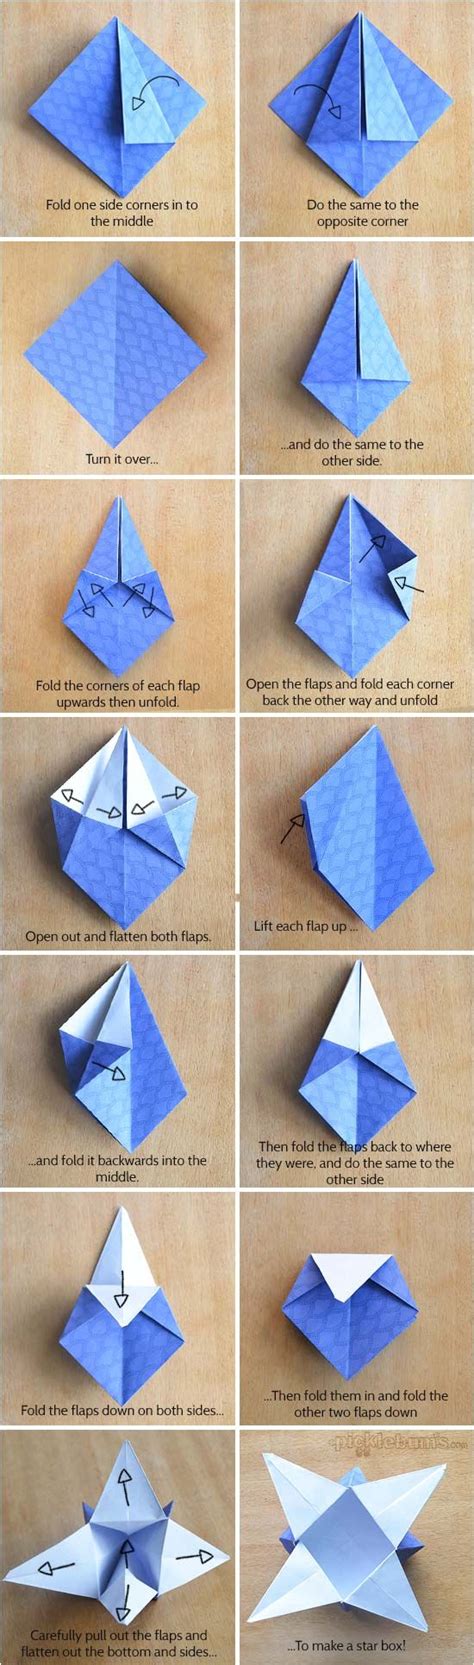 How To Make Origami Star Boxes And Free Printable Paper So You Can Make